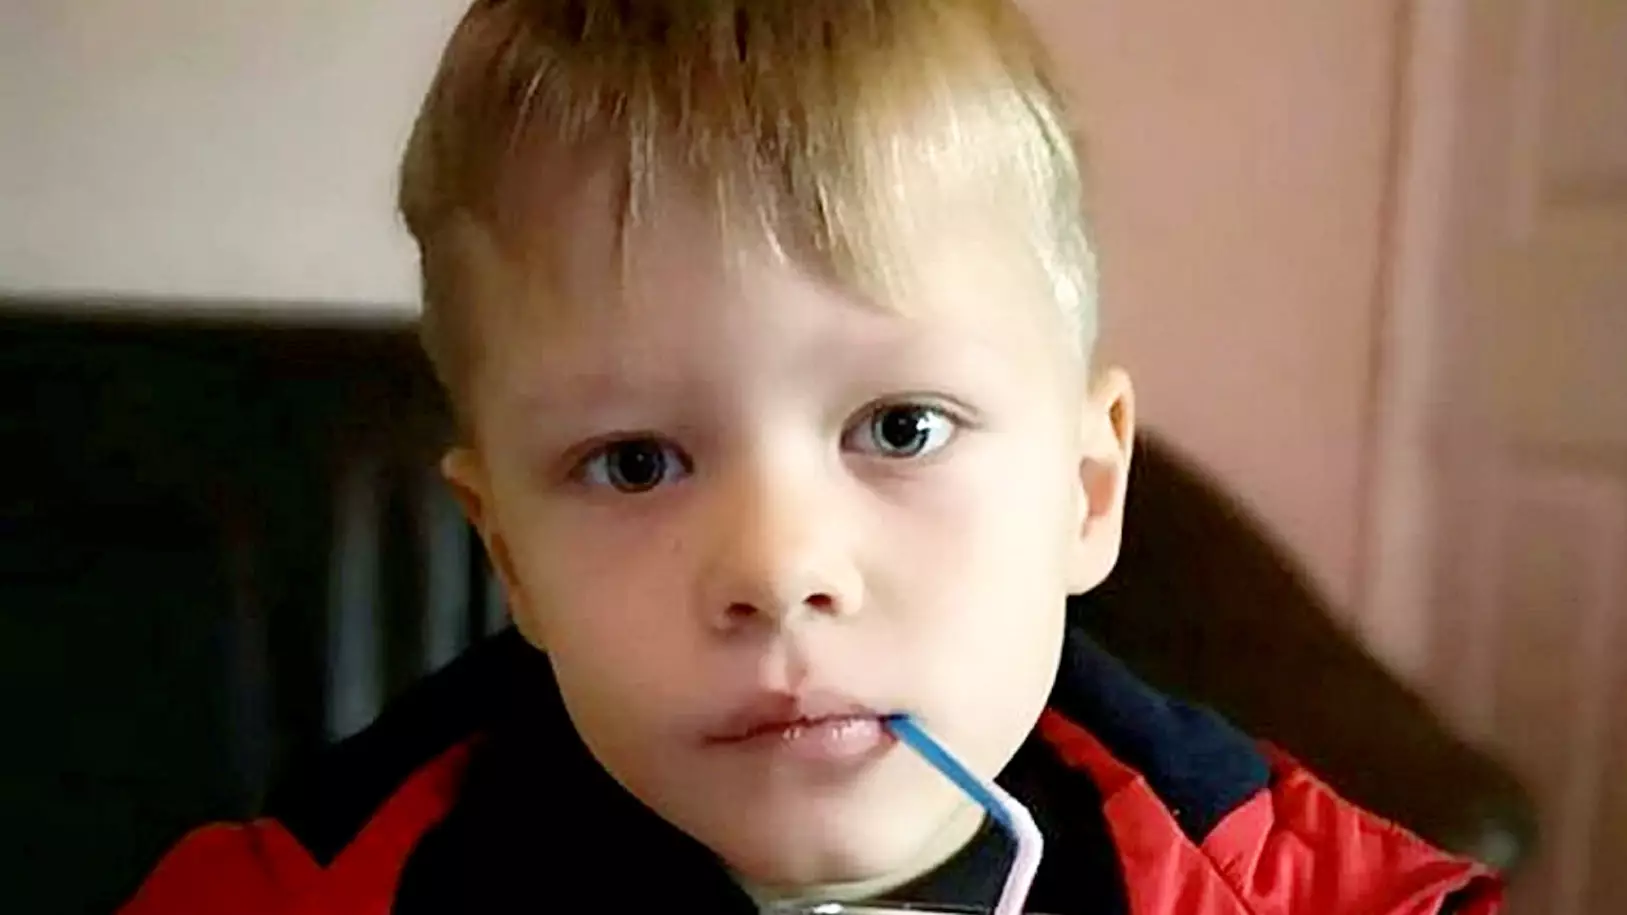 Mum Furious After Six-Year-Old Son's Front Teeth Knocked Out By Hammer During School Lesson